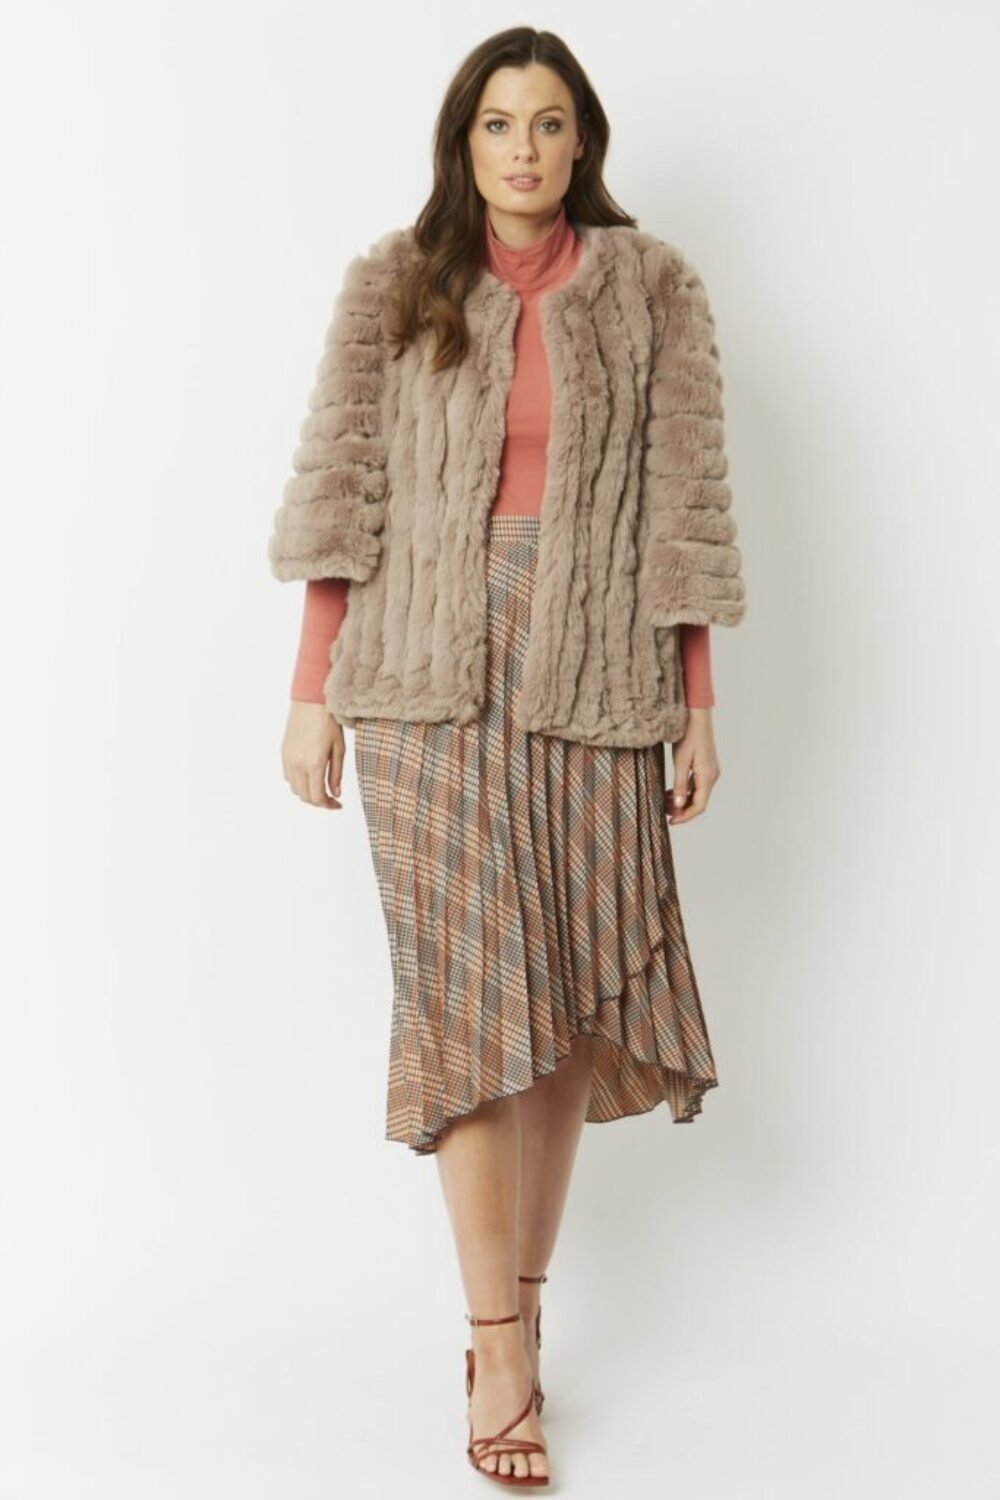 Shop Lux Mocha Faux Fur Striped Coat and women's luxury and designer clothes at www.lux-apparel.co.uk